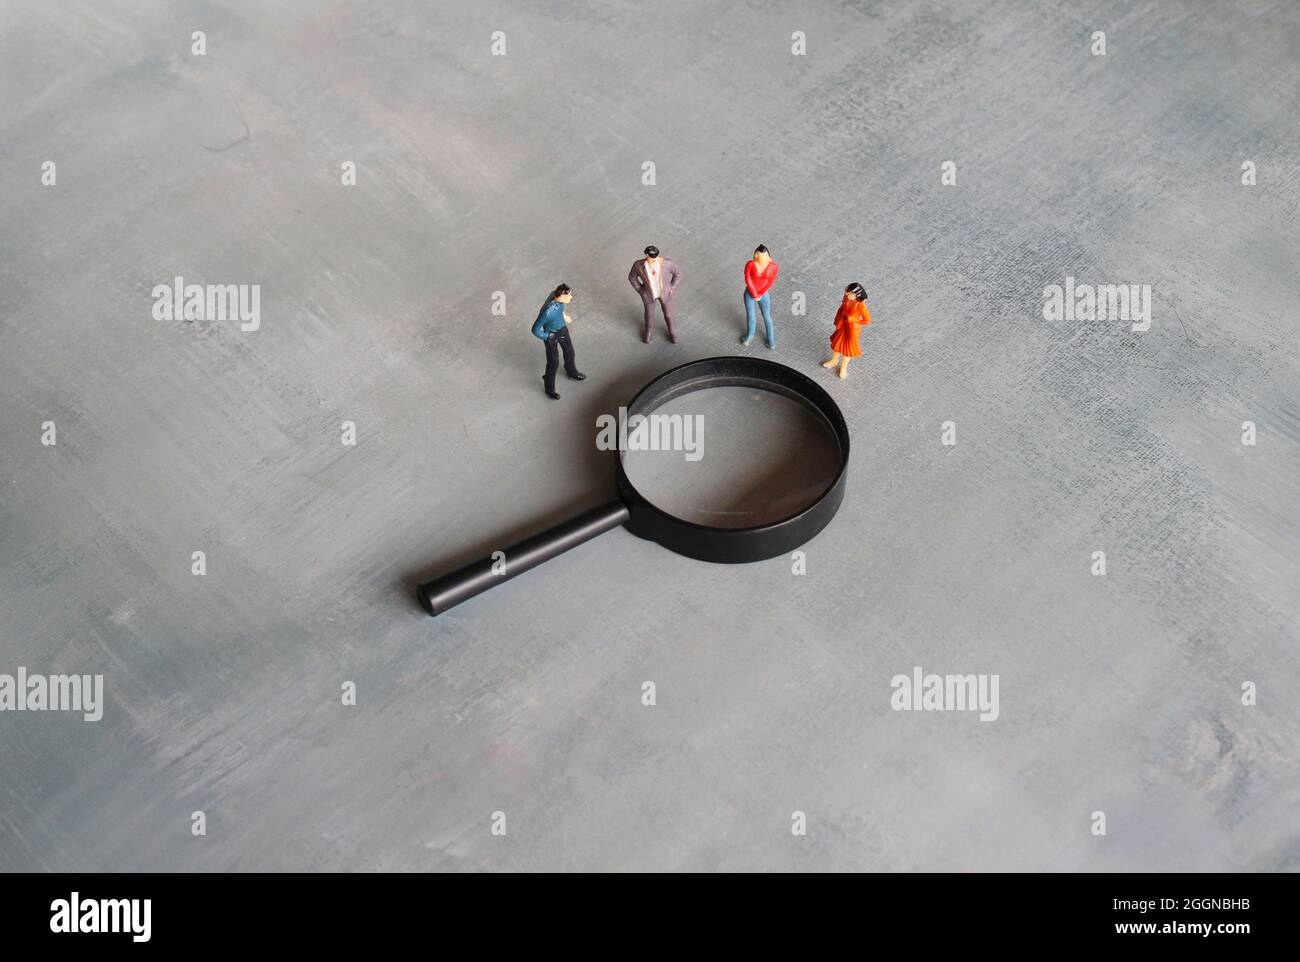 Concept of frequently asked questions, query, investigation, search for information. Miniature people looking at magnifying glass Stock Photo